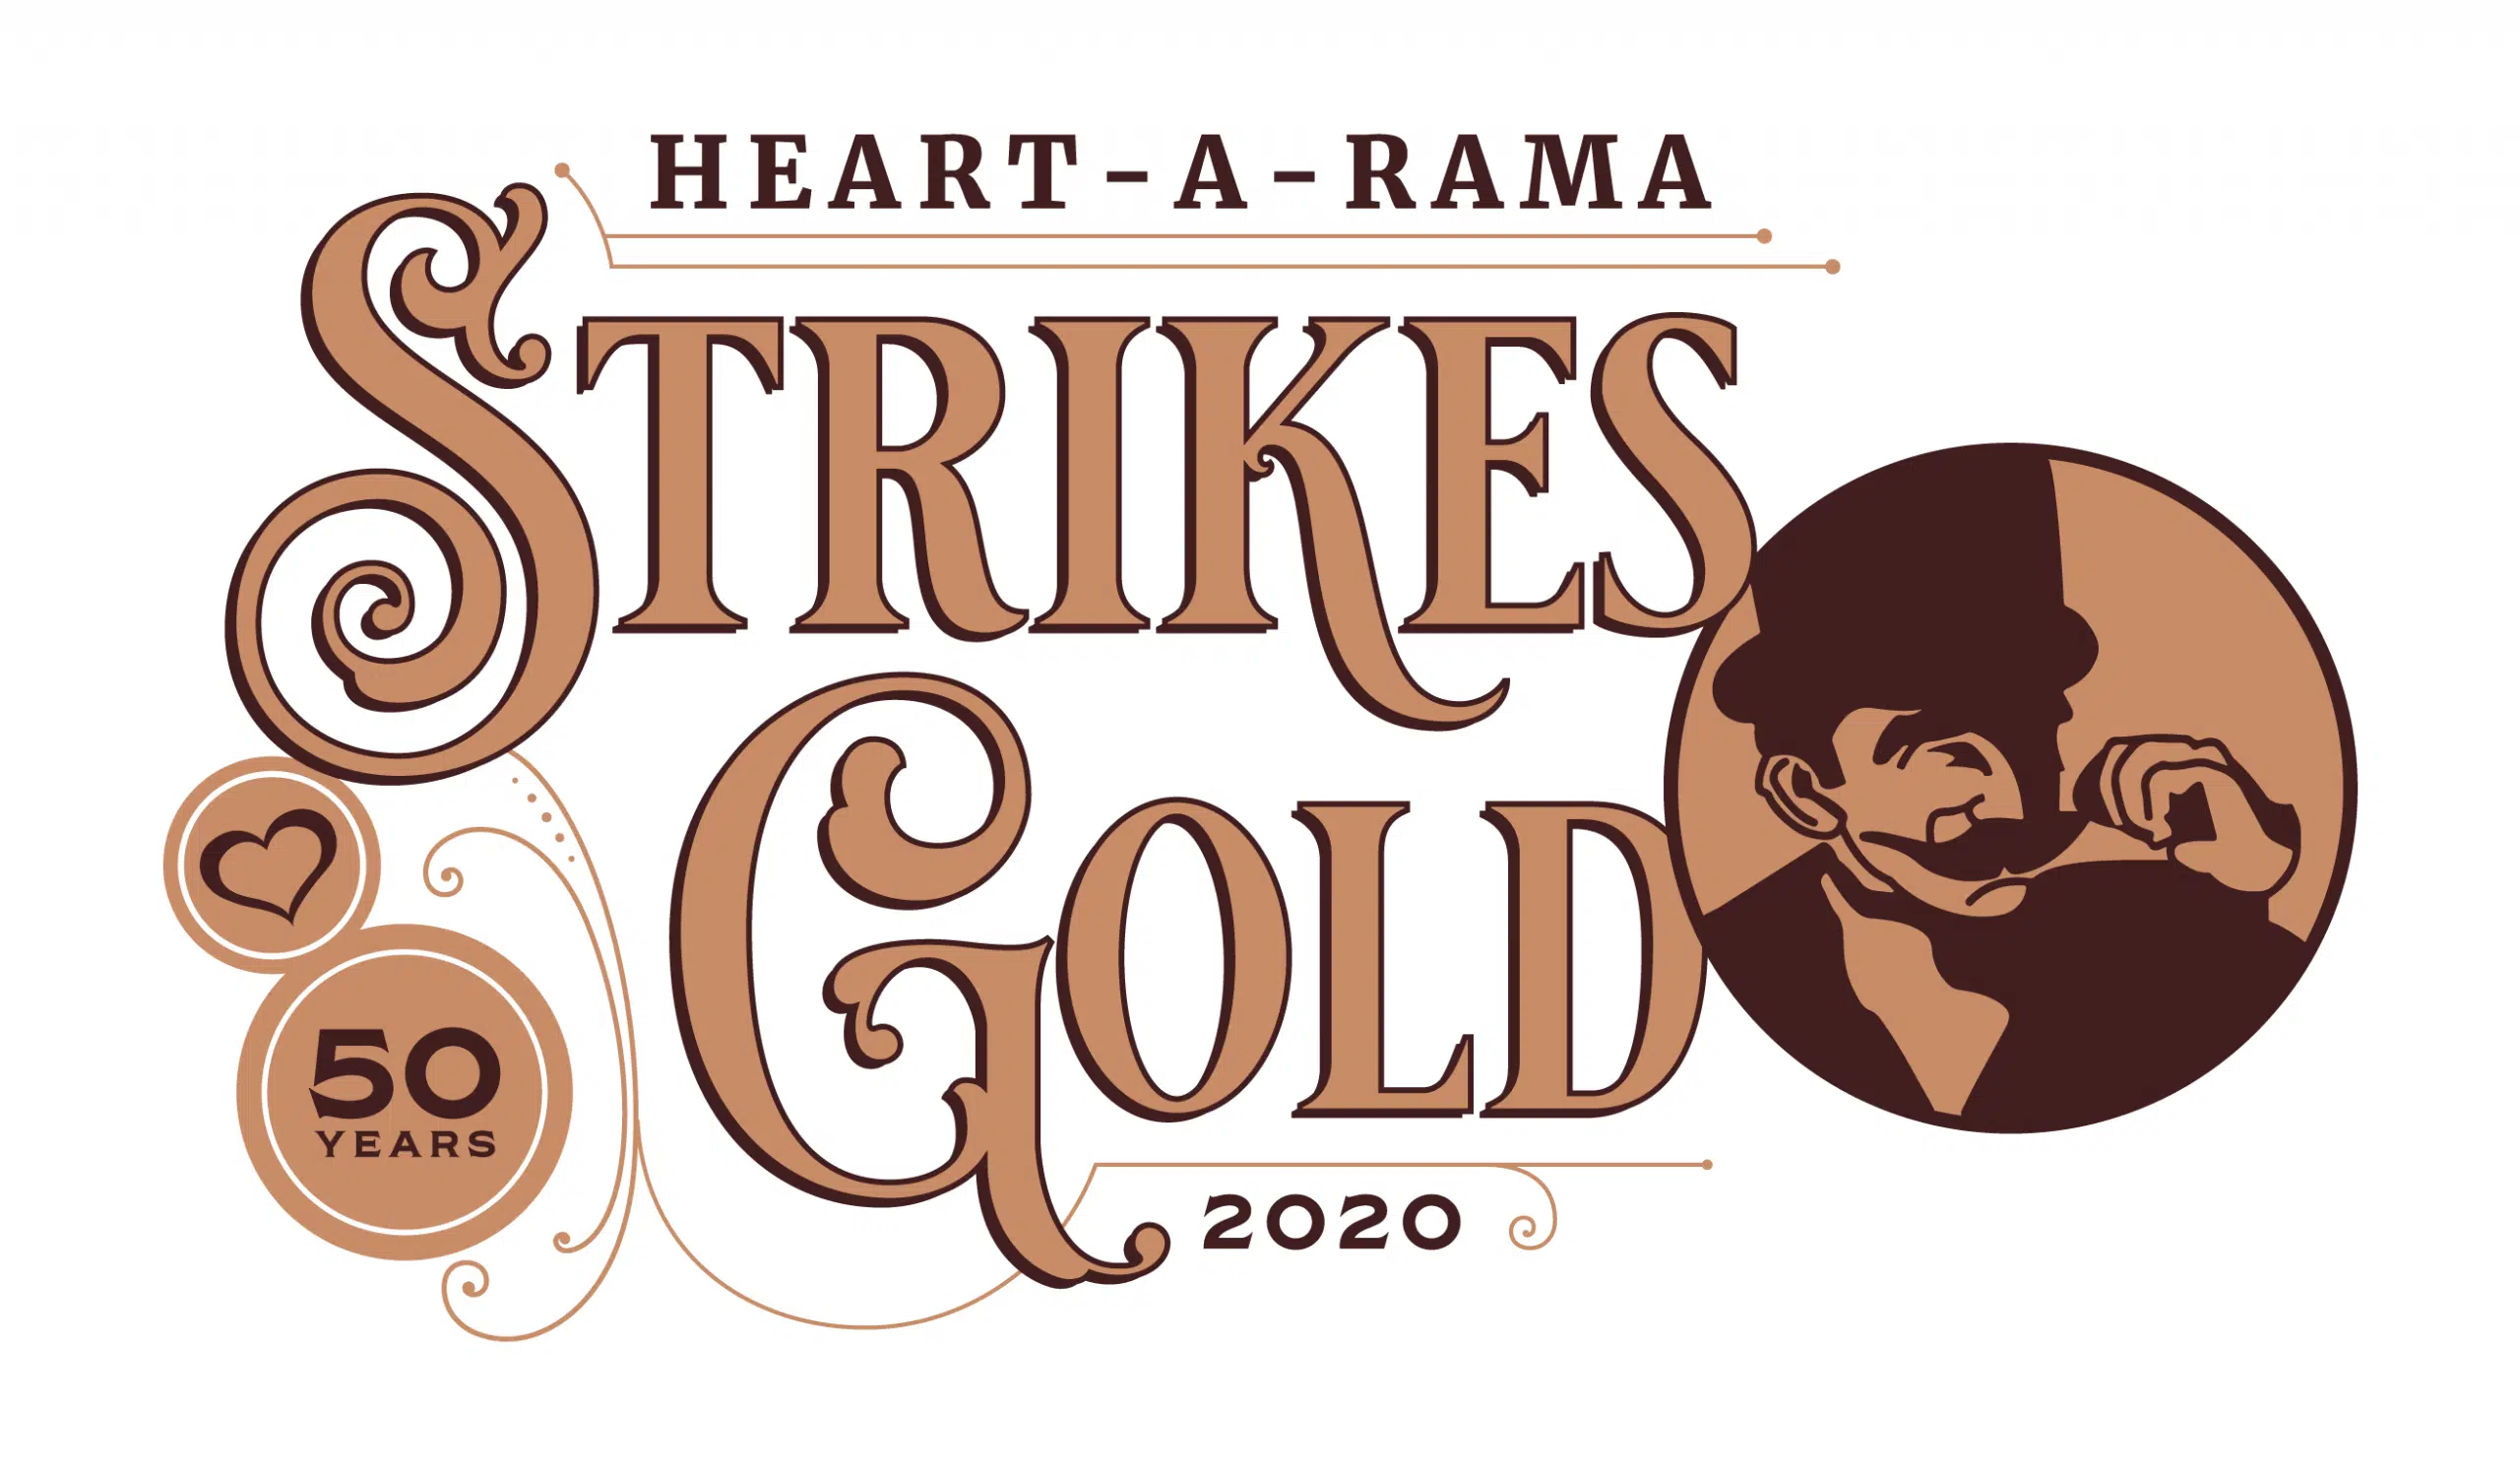 Heart-A-Rama Tickets Now Available for 50th Anniversary Show